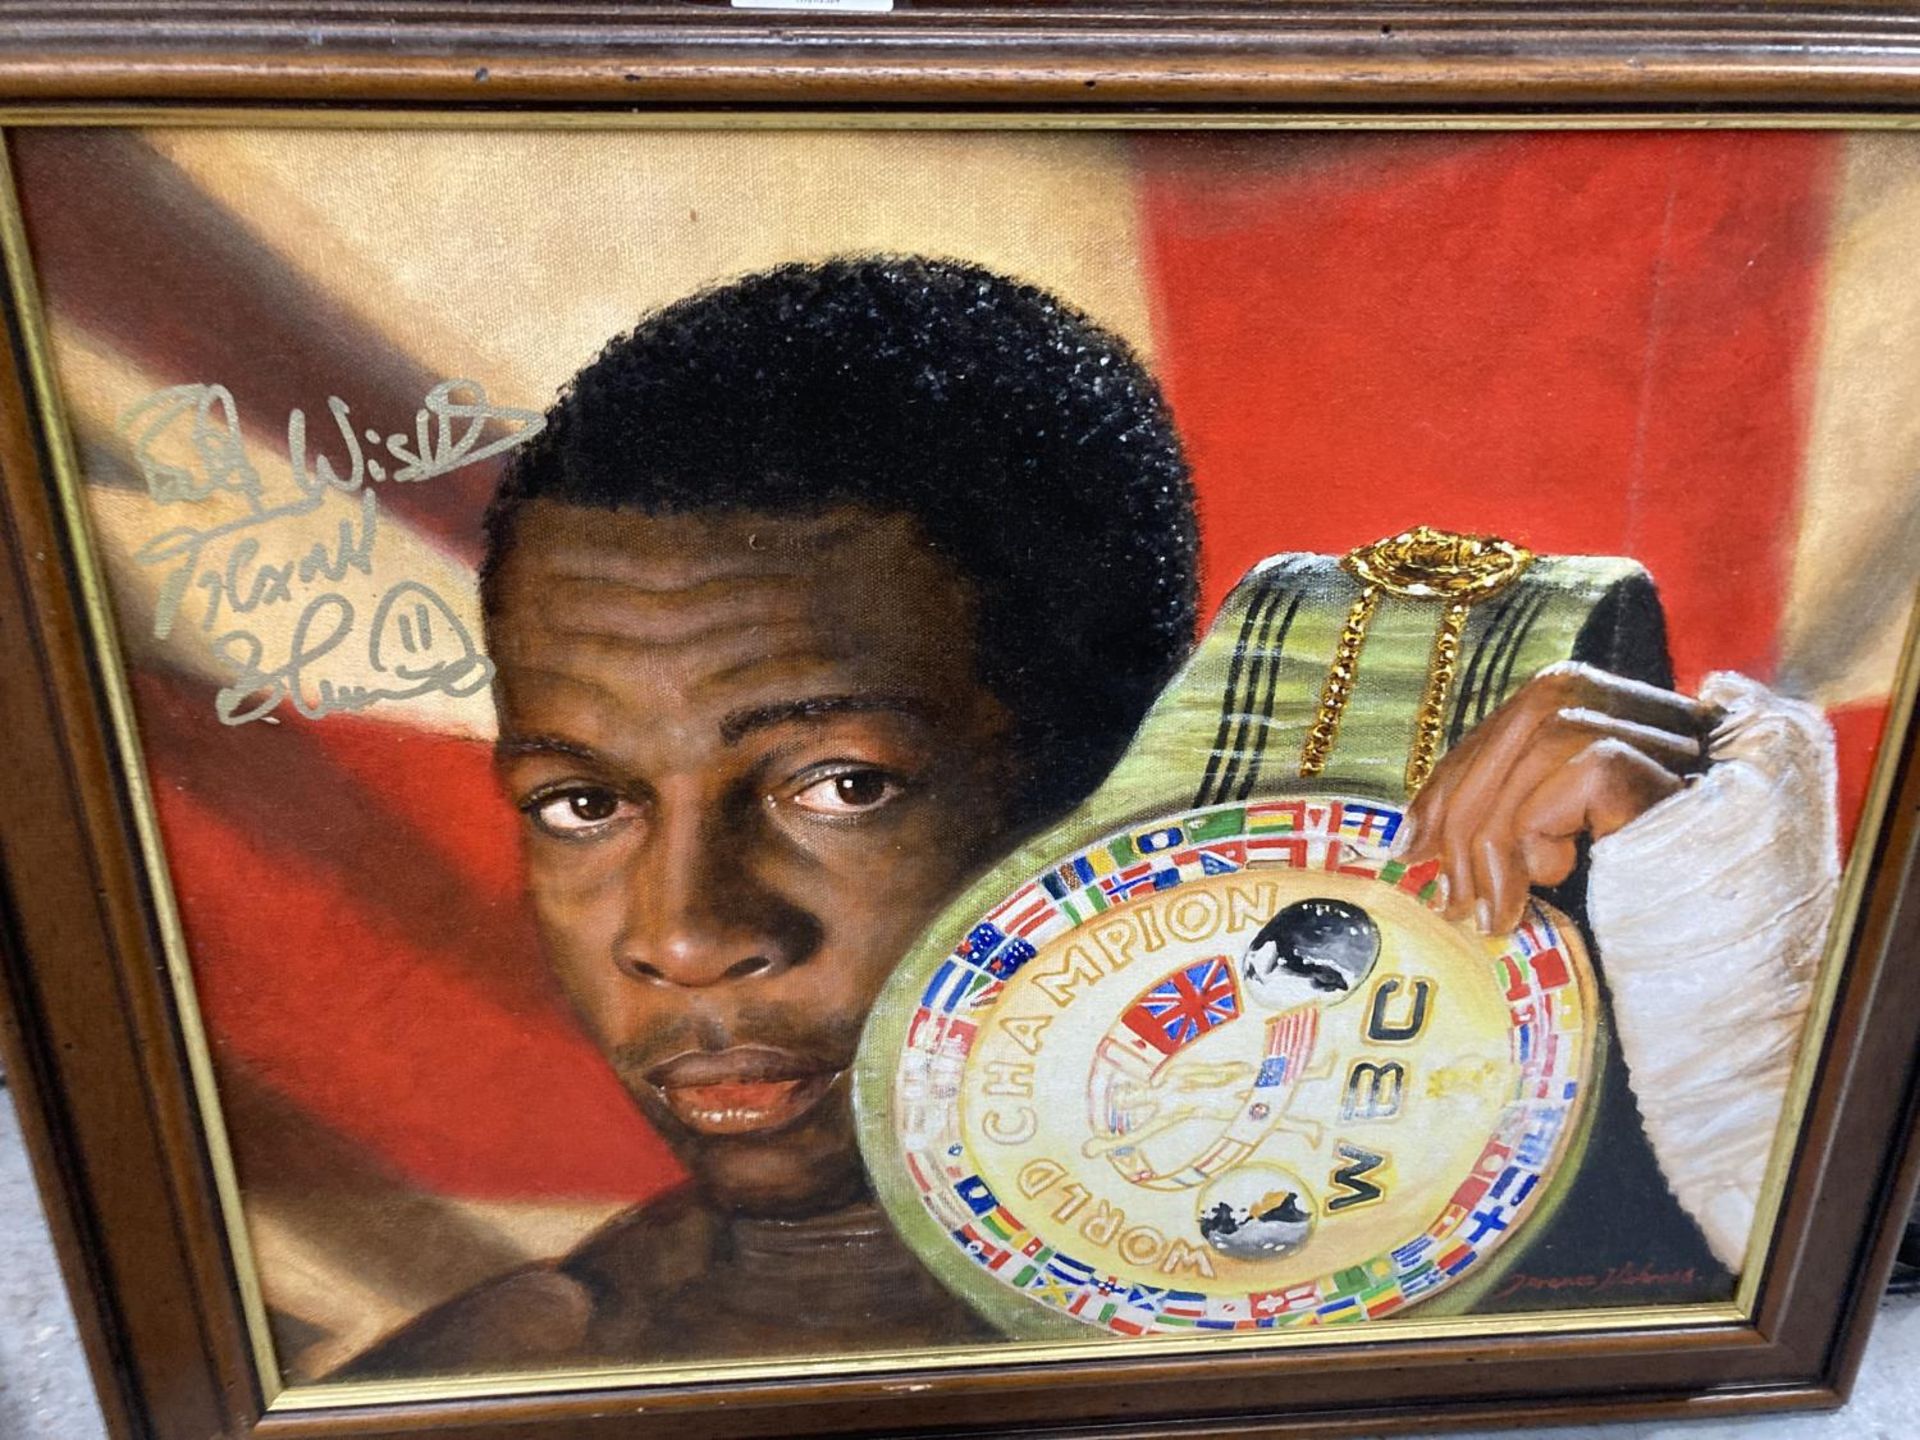 A FRAMED OIL PAINTING OF FRANK BRUNO WITH W.B.C BELT, SIGNED - Image 2 of 3